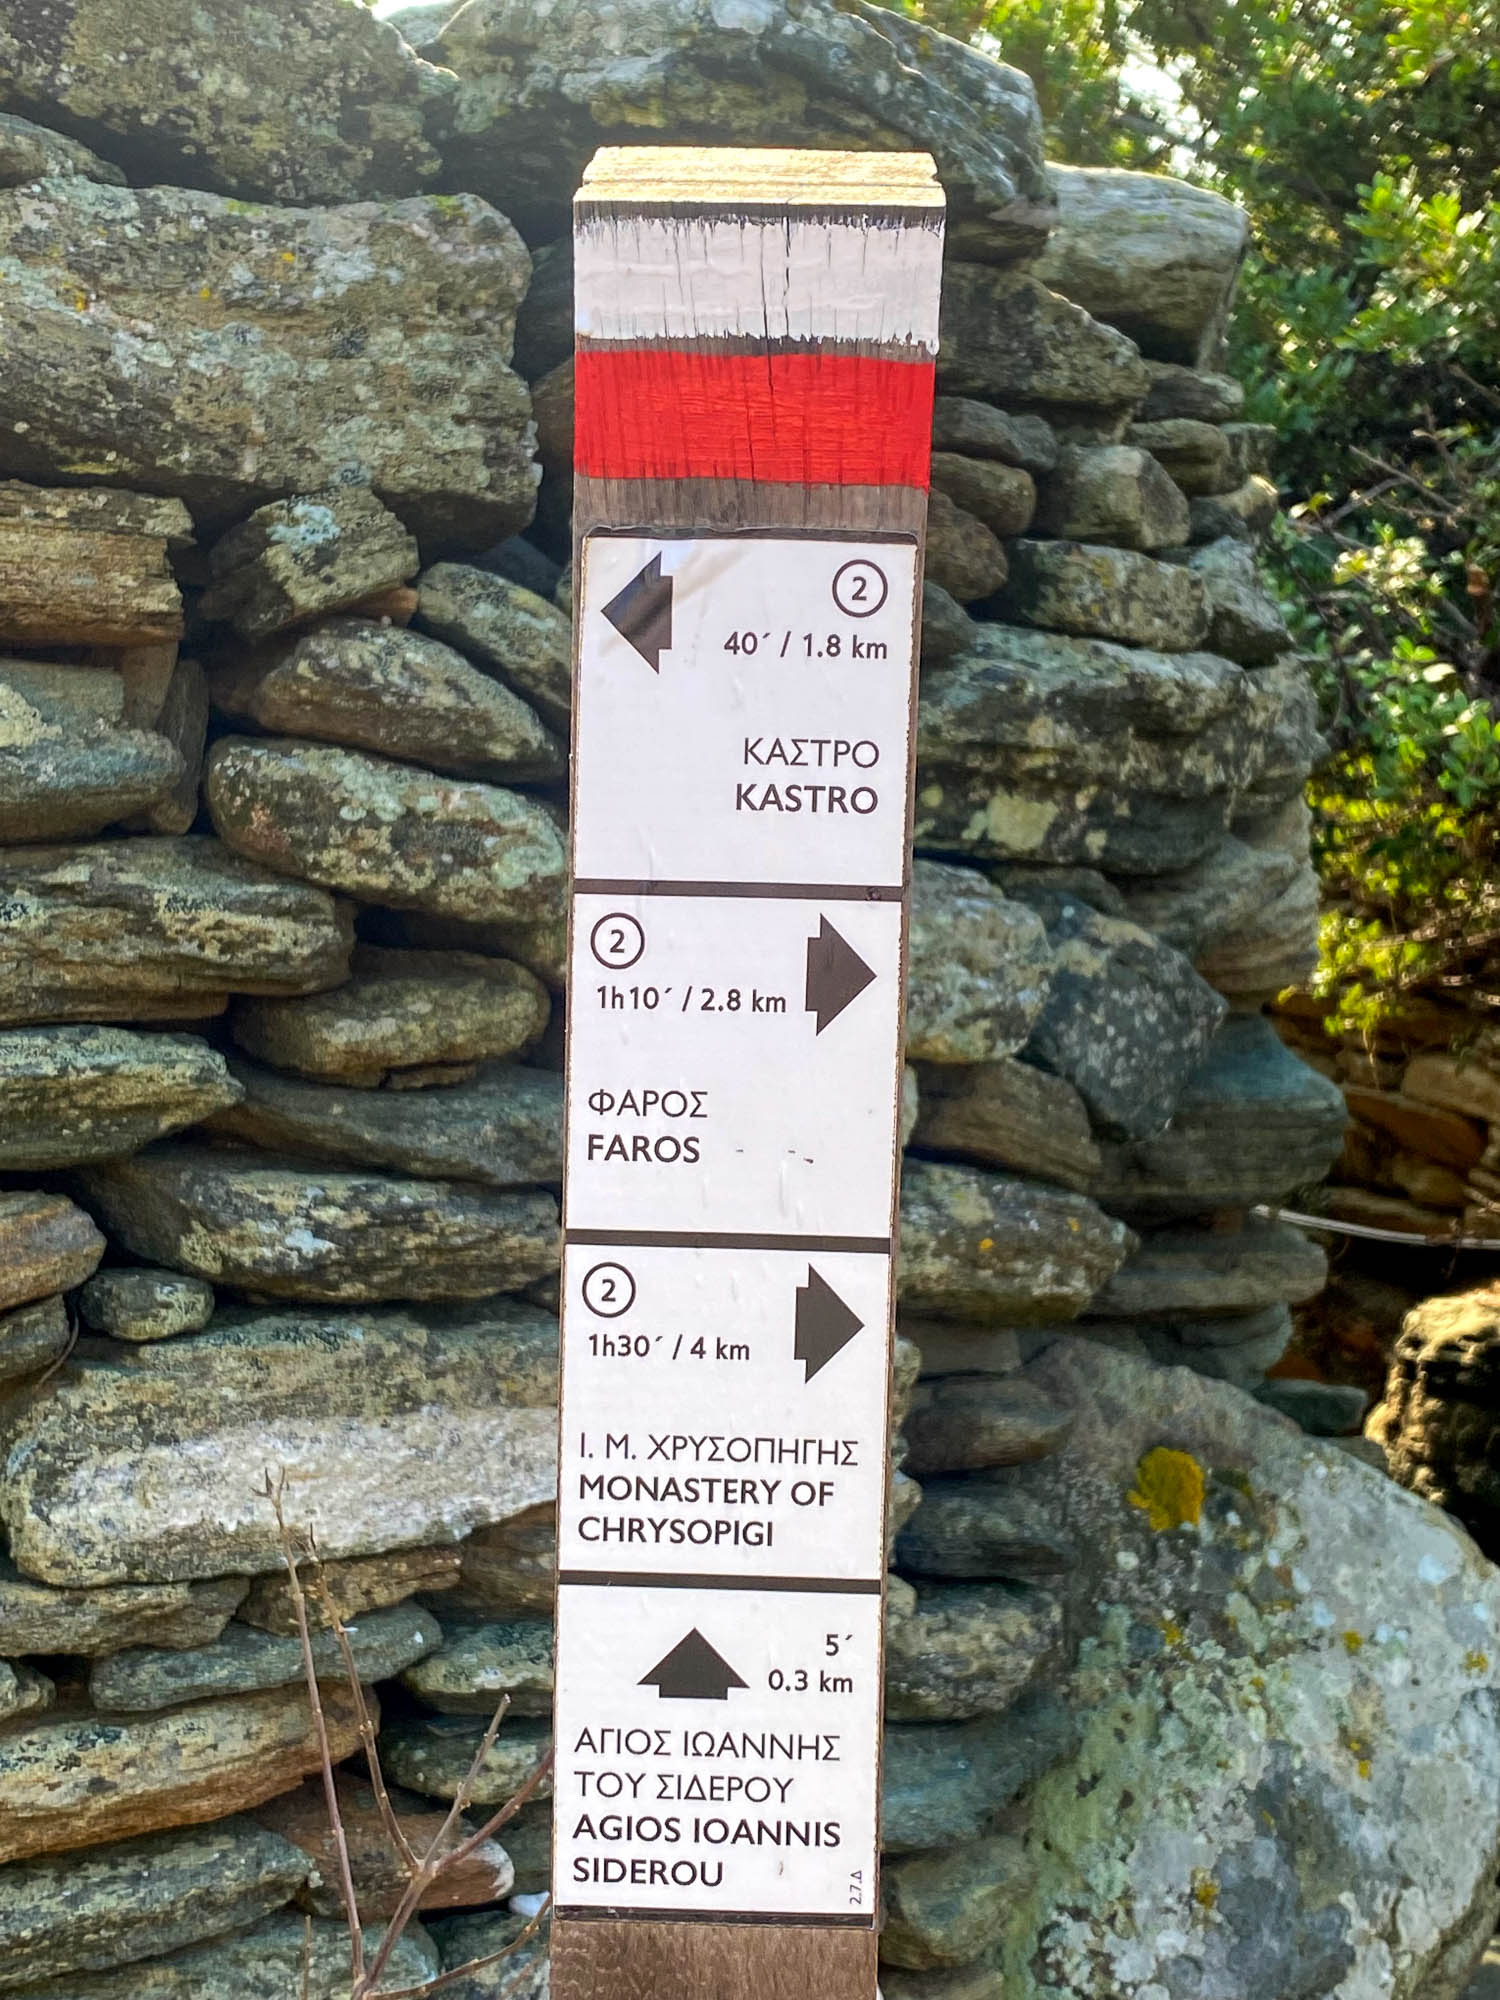 A wooden signpost with directional arrows and distances against a stone wall background, guiding to various Greek landmarks including a castle, lighthouse, and monastery.